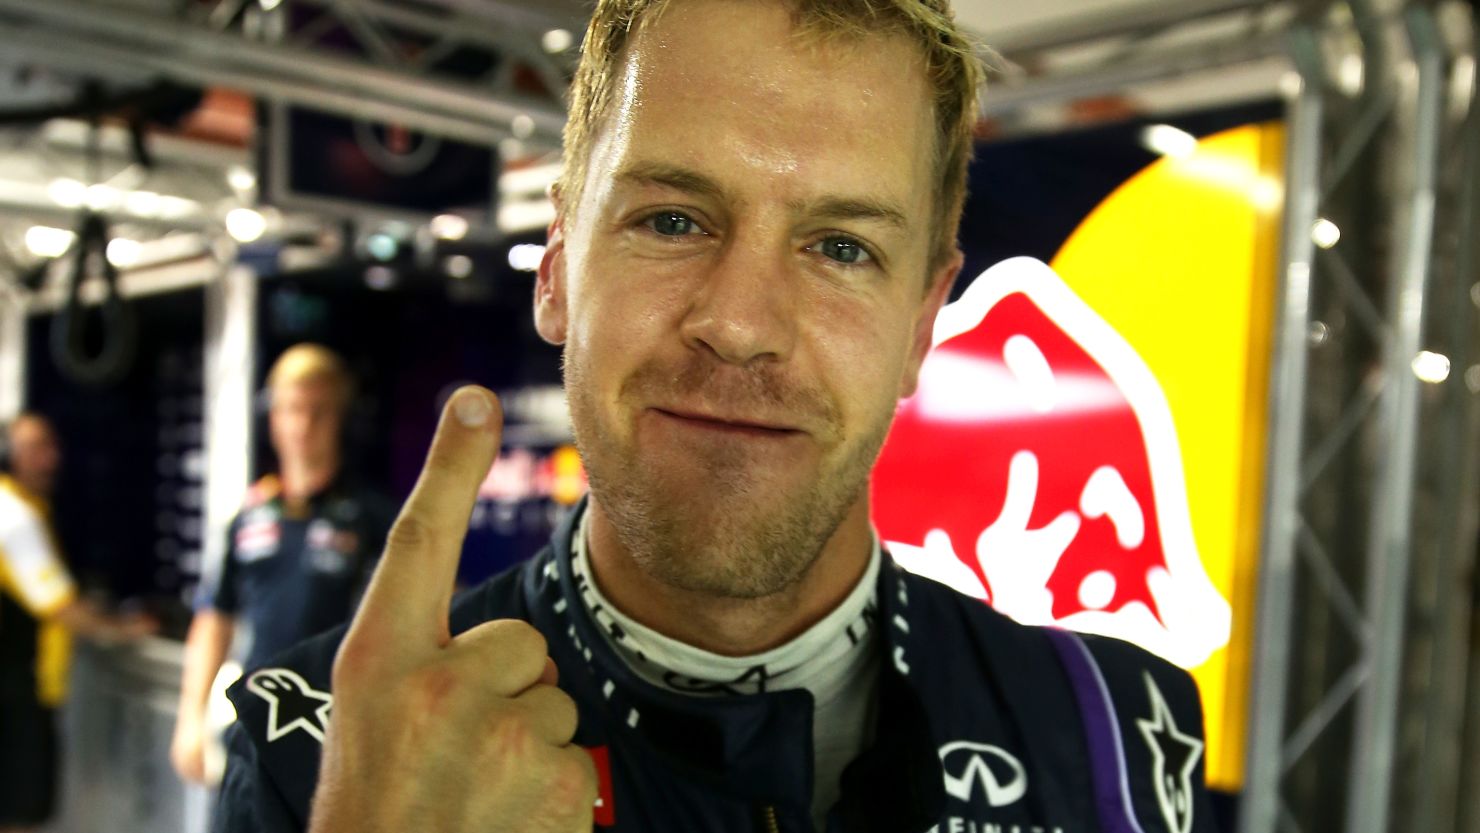 Red Bull has consistently provided Sebastian Vettel with the fastest car in F1.